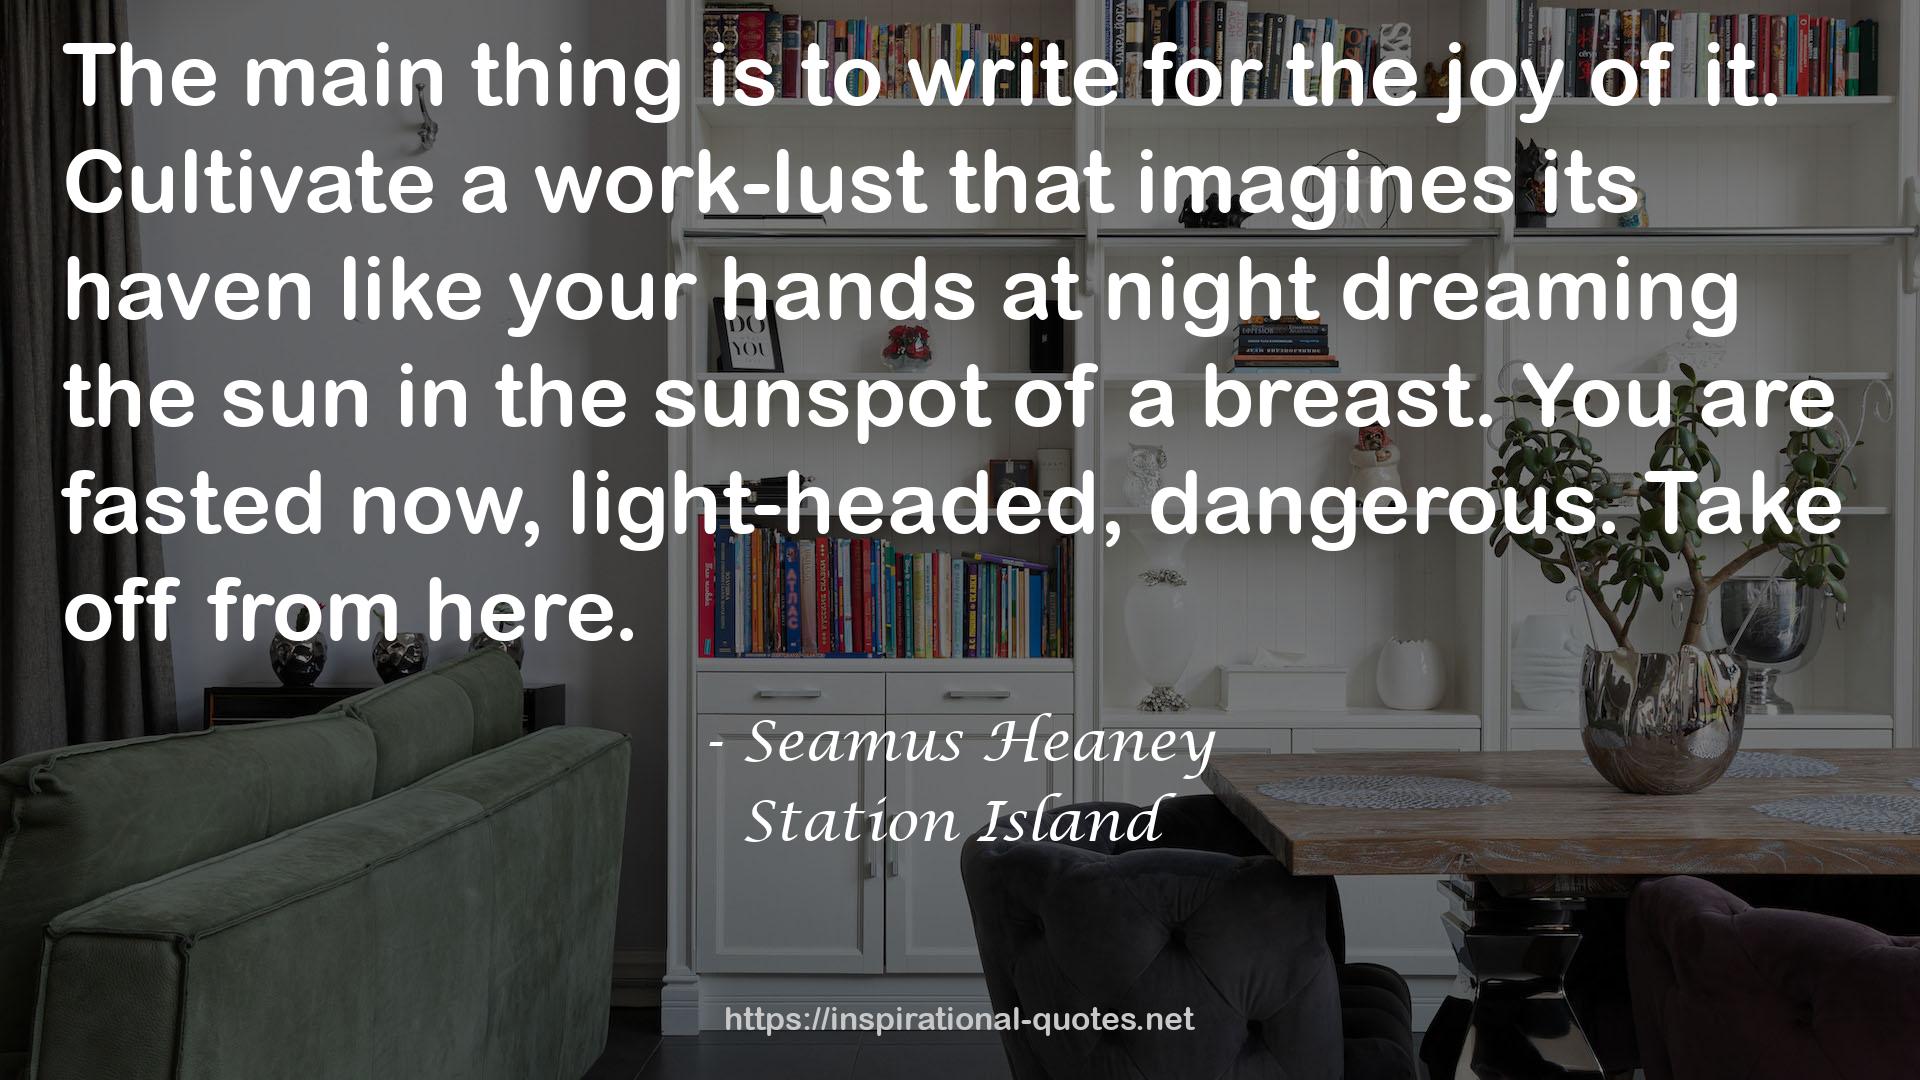 Station Island QUOTES